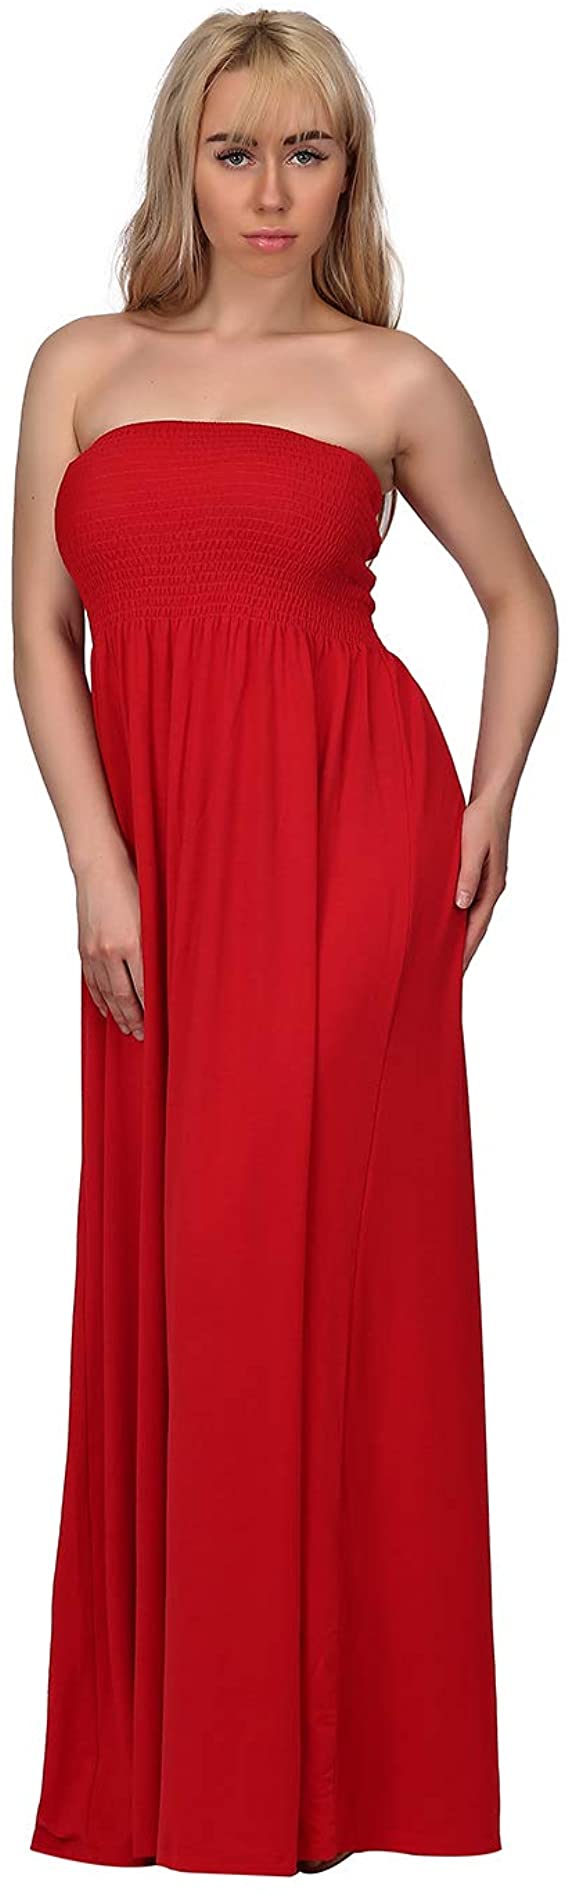 HDE Stretchy Ruched Tube Top Red Dress For Plus-Size Women